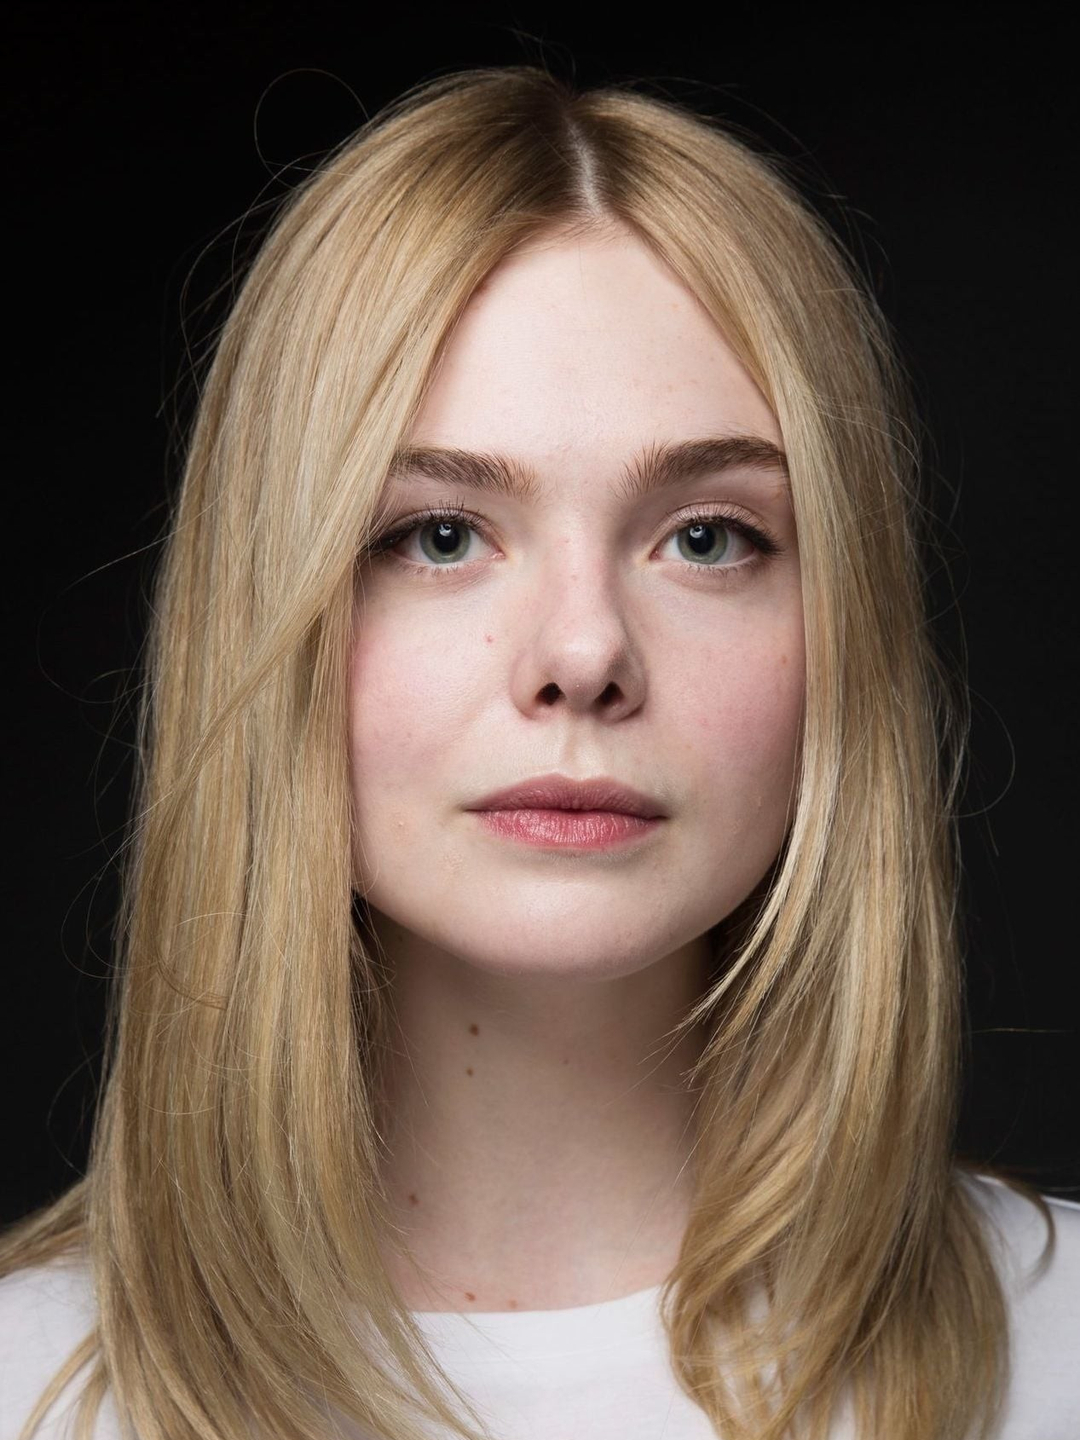 Elle Fanning young photos